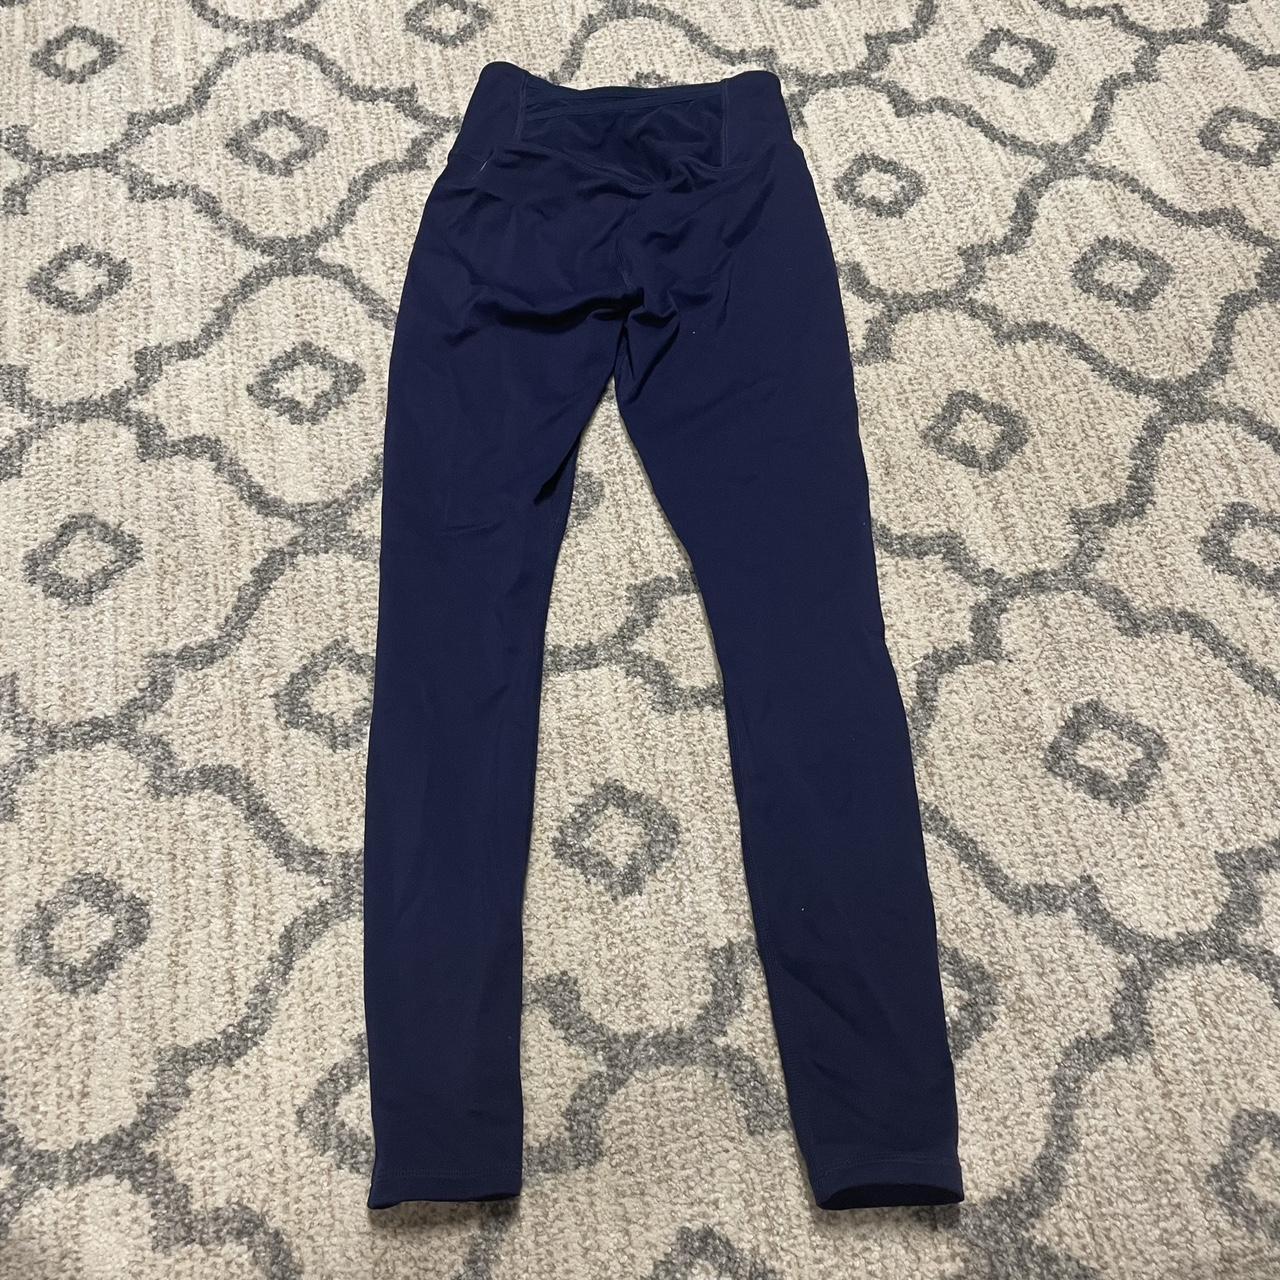 Fabletics motion 365 leggings No front seam and - Depop